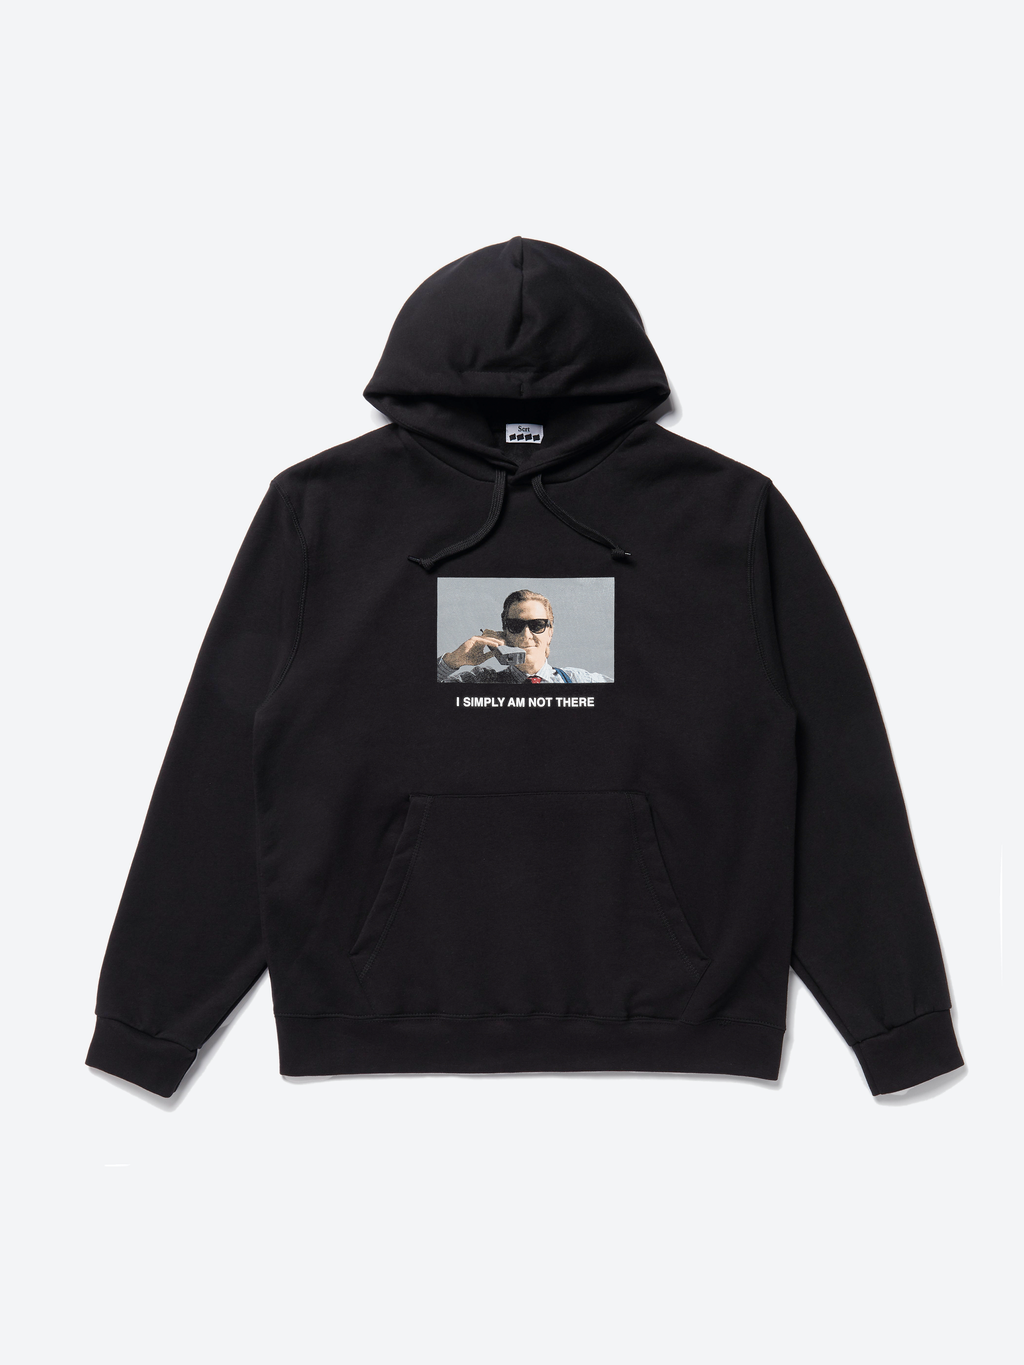 Not There Hoodie - Black